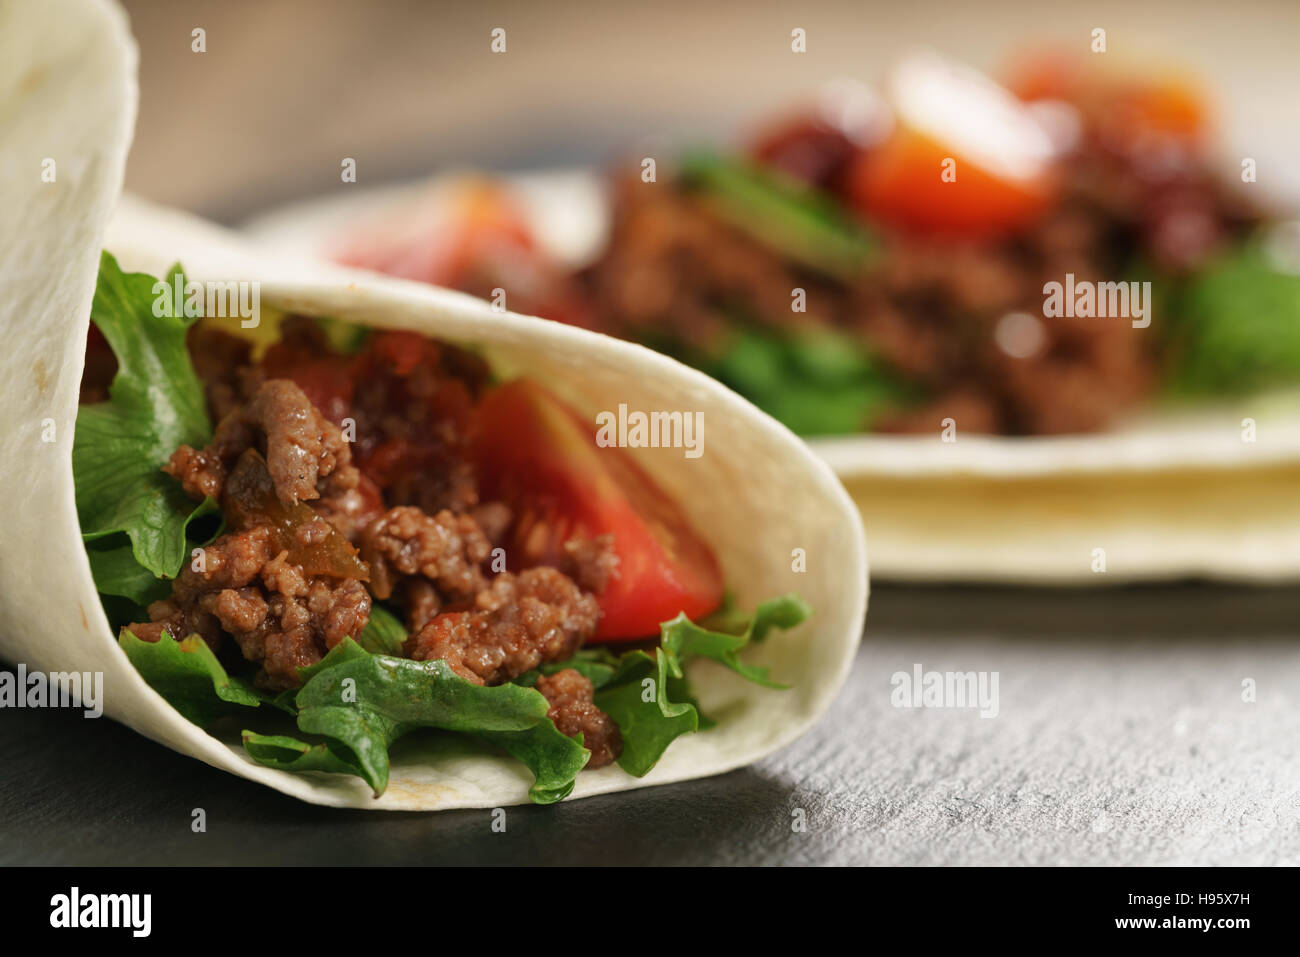 homemade tortilla with beef, frillice and vegetables Stock Photo